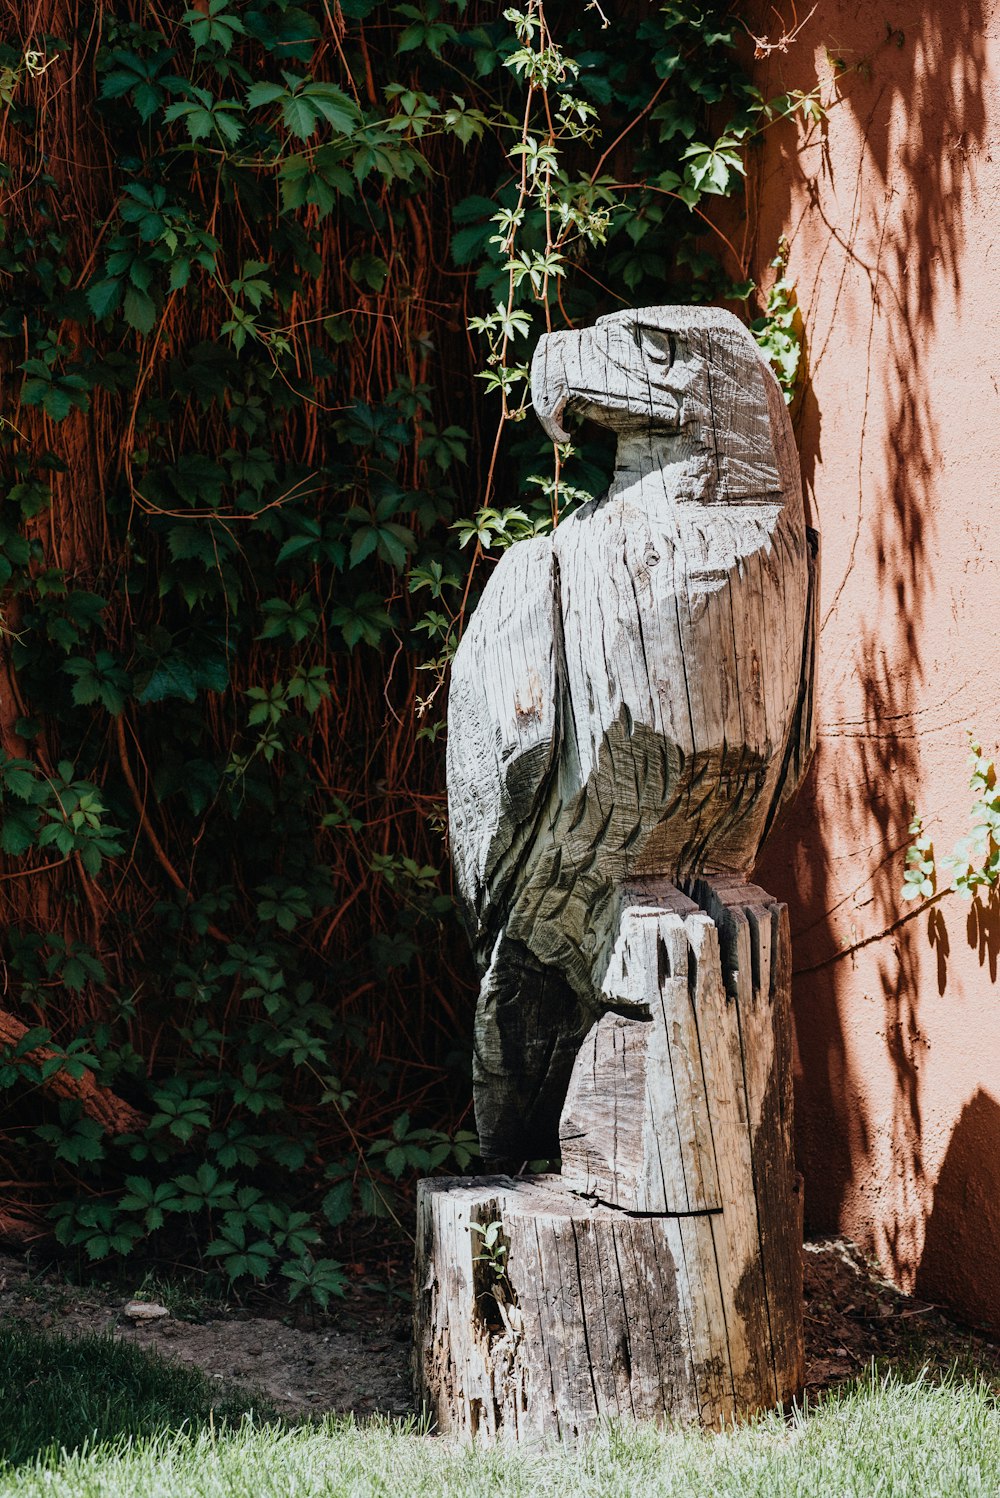 a statue of a bird sitting on top of a tree stump